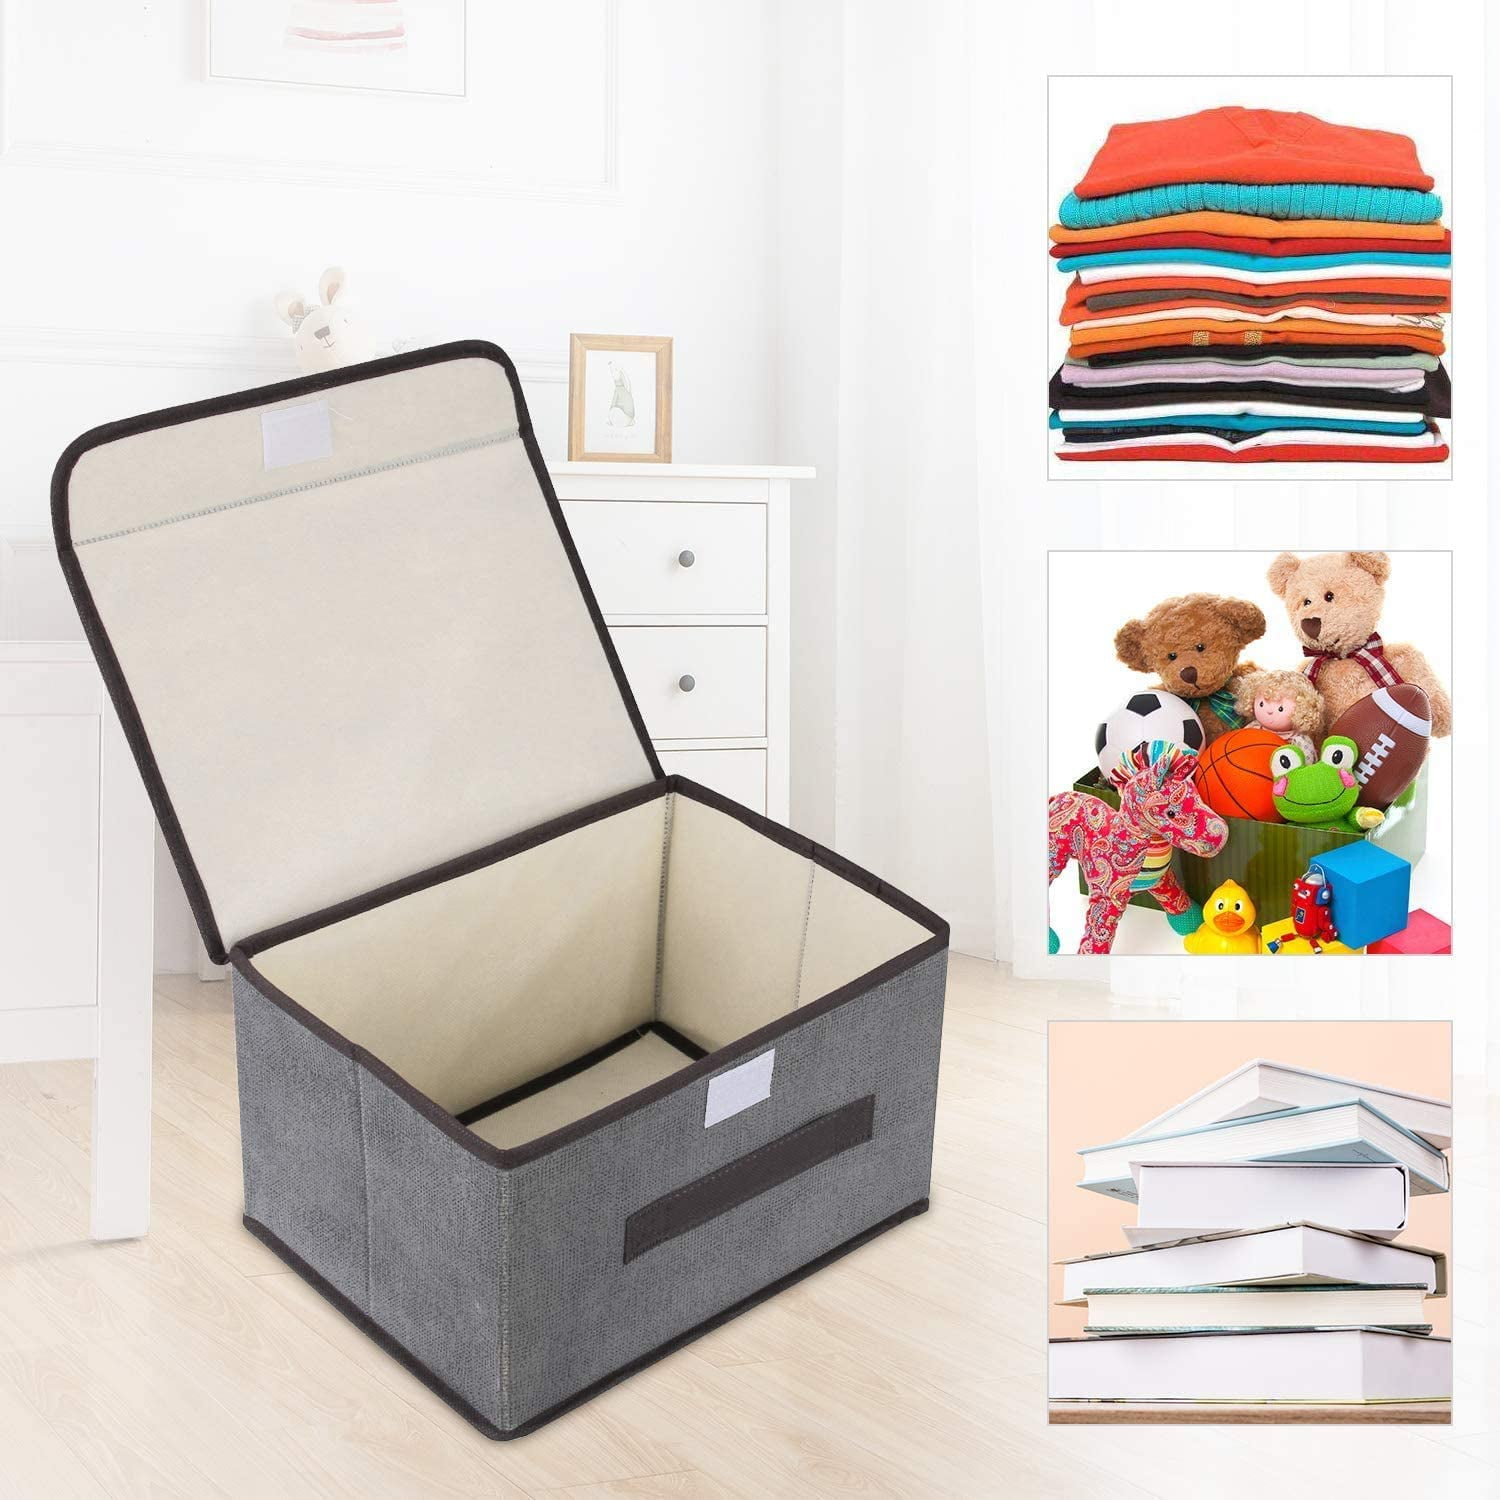 Deals！Closet Storage Boxes for Clothes,Clothing Storage Bins for Closet  with Handles, Foldable Rectangle Baskets, Fabric Containers Boxes for  Organizing Shelves Bedroom 